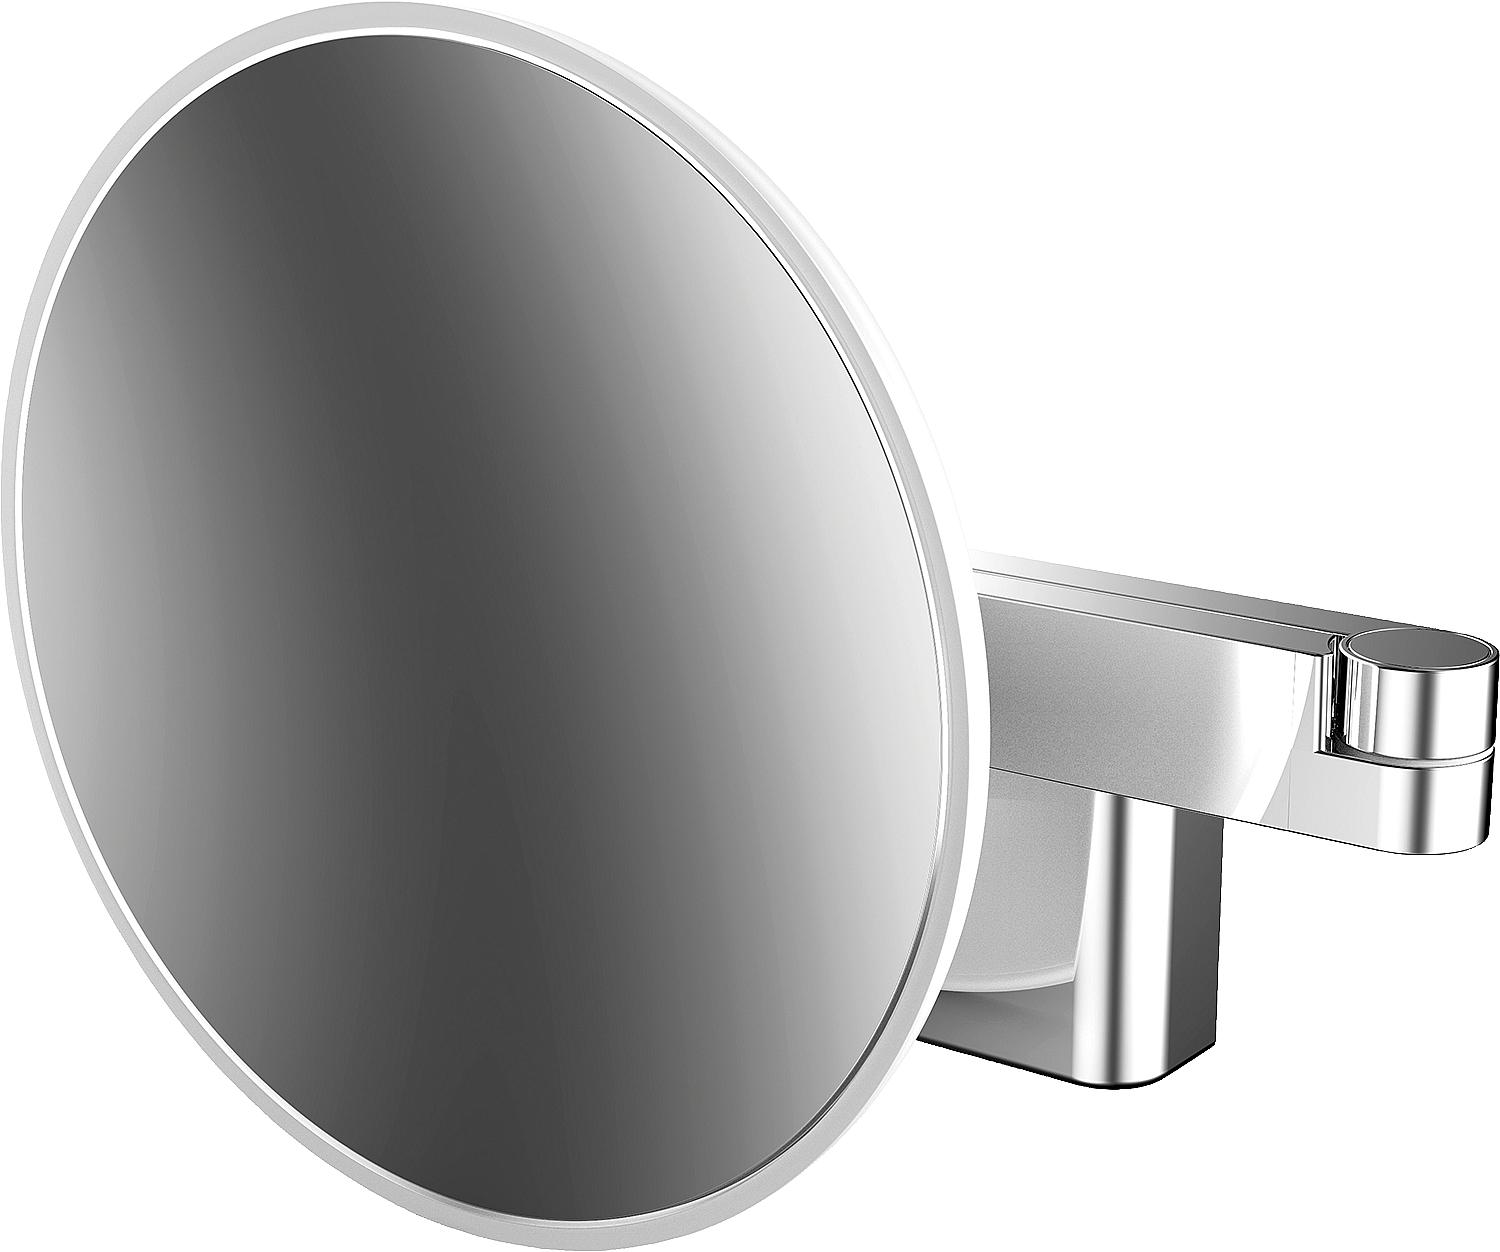 asdec life ® LED wall-mounted cosmetic mirror emco evo, 5x magnification D: 209mm, double-jointed arm